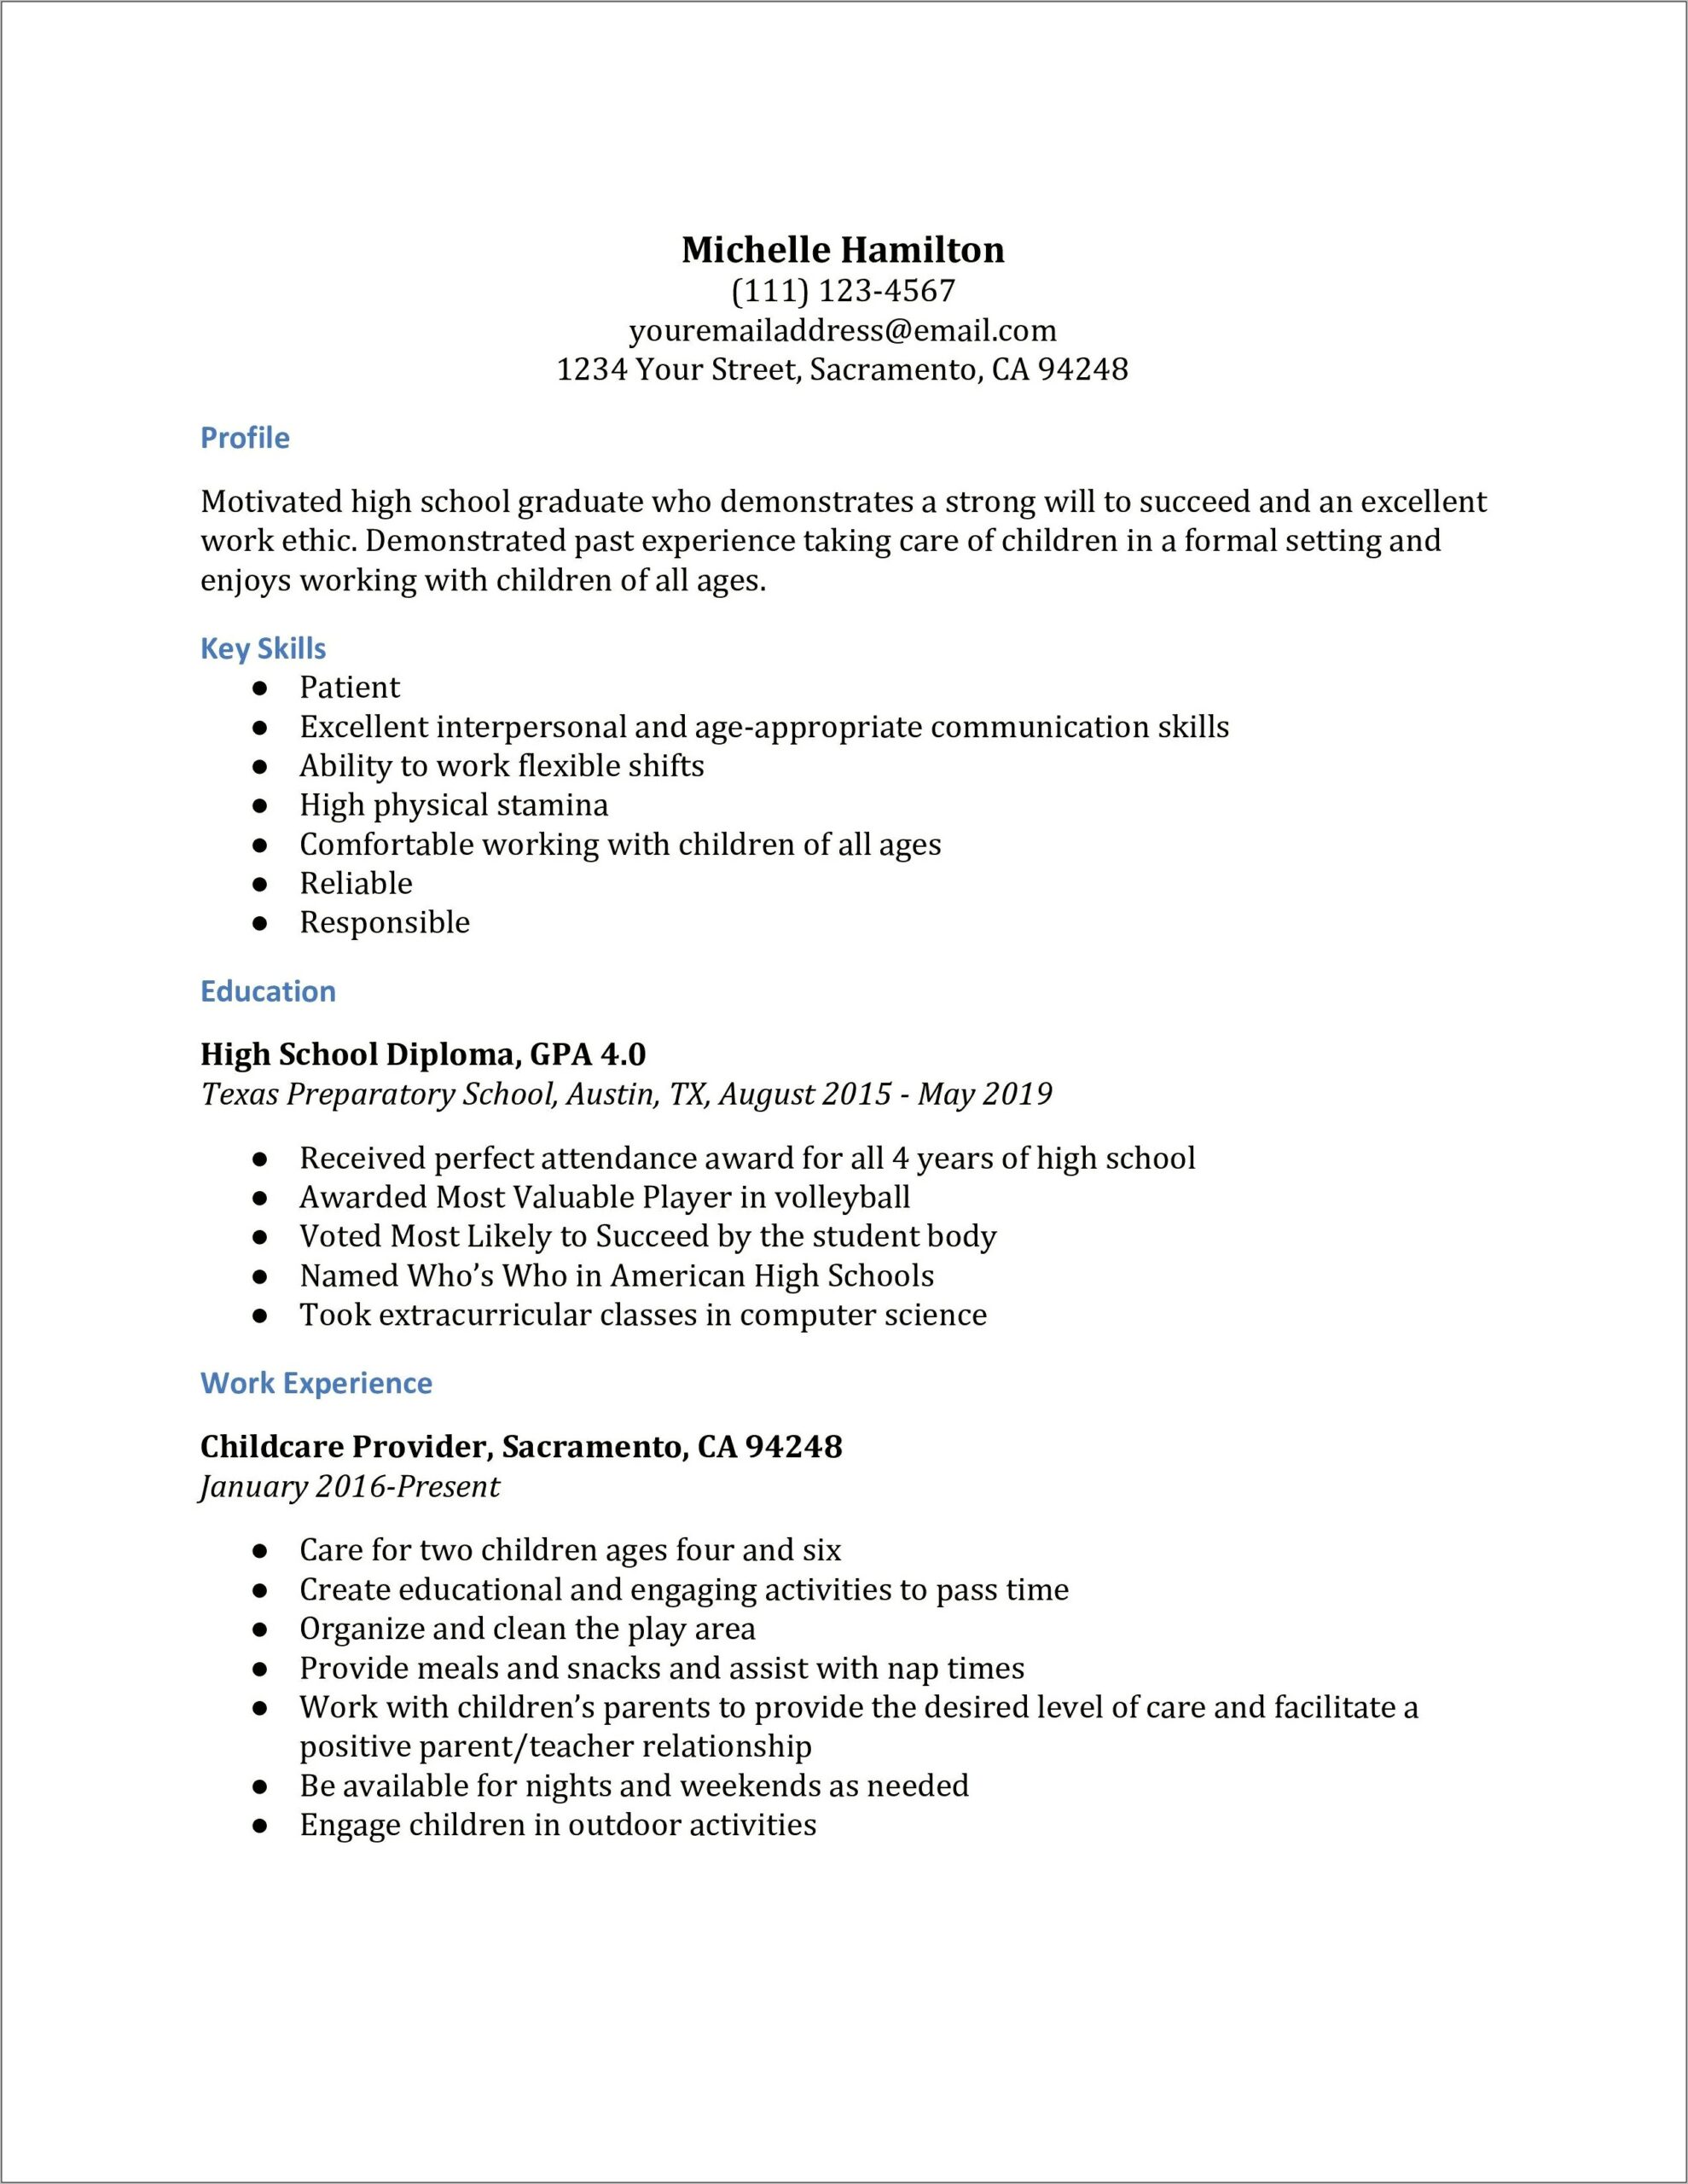 Example Job Resume For High School Student